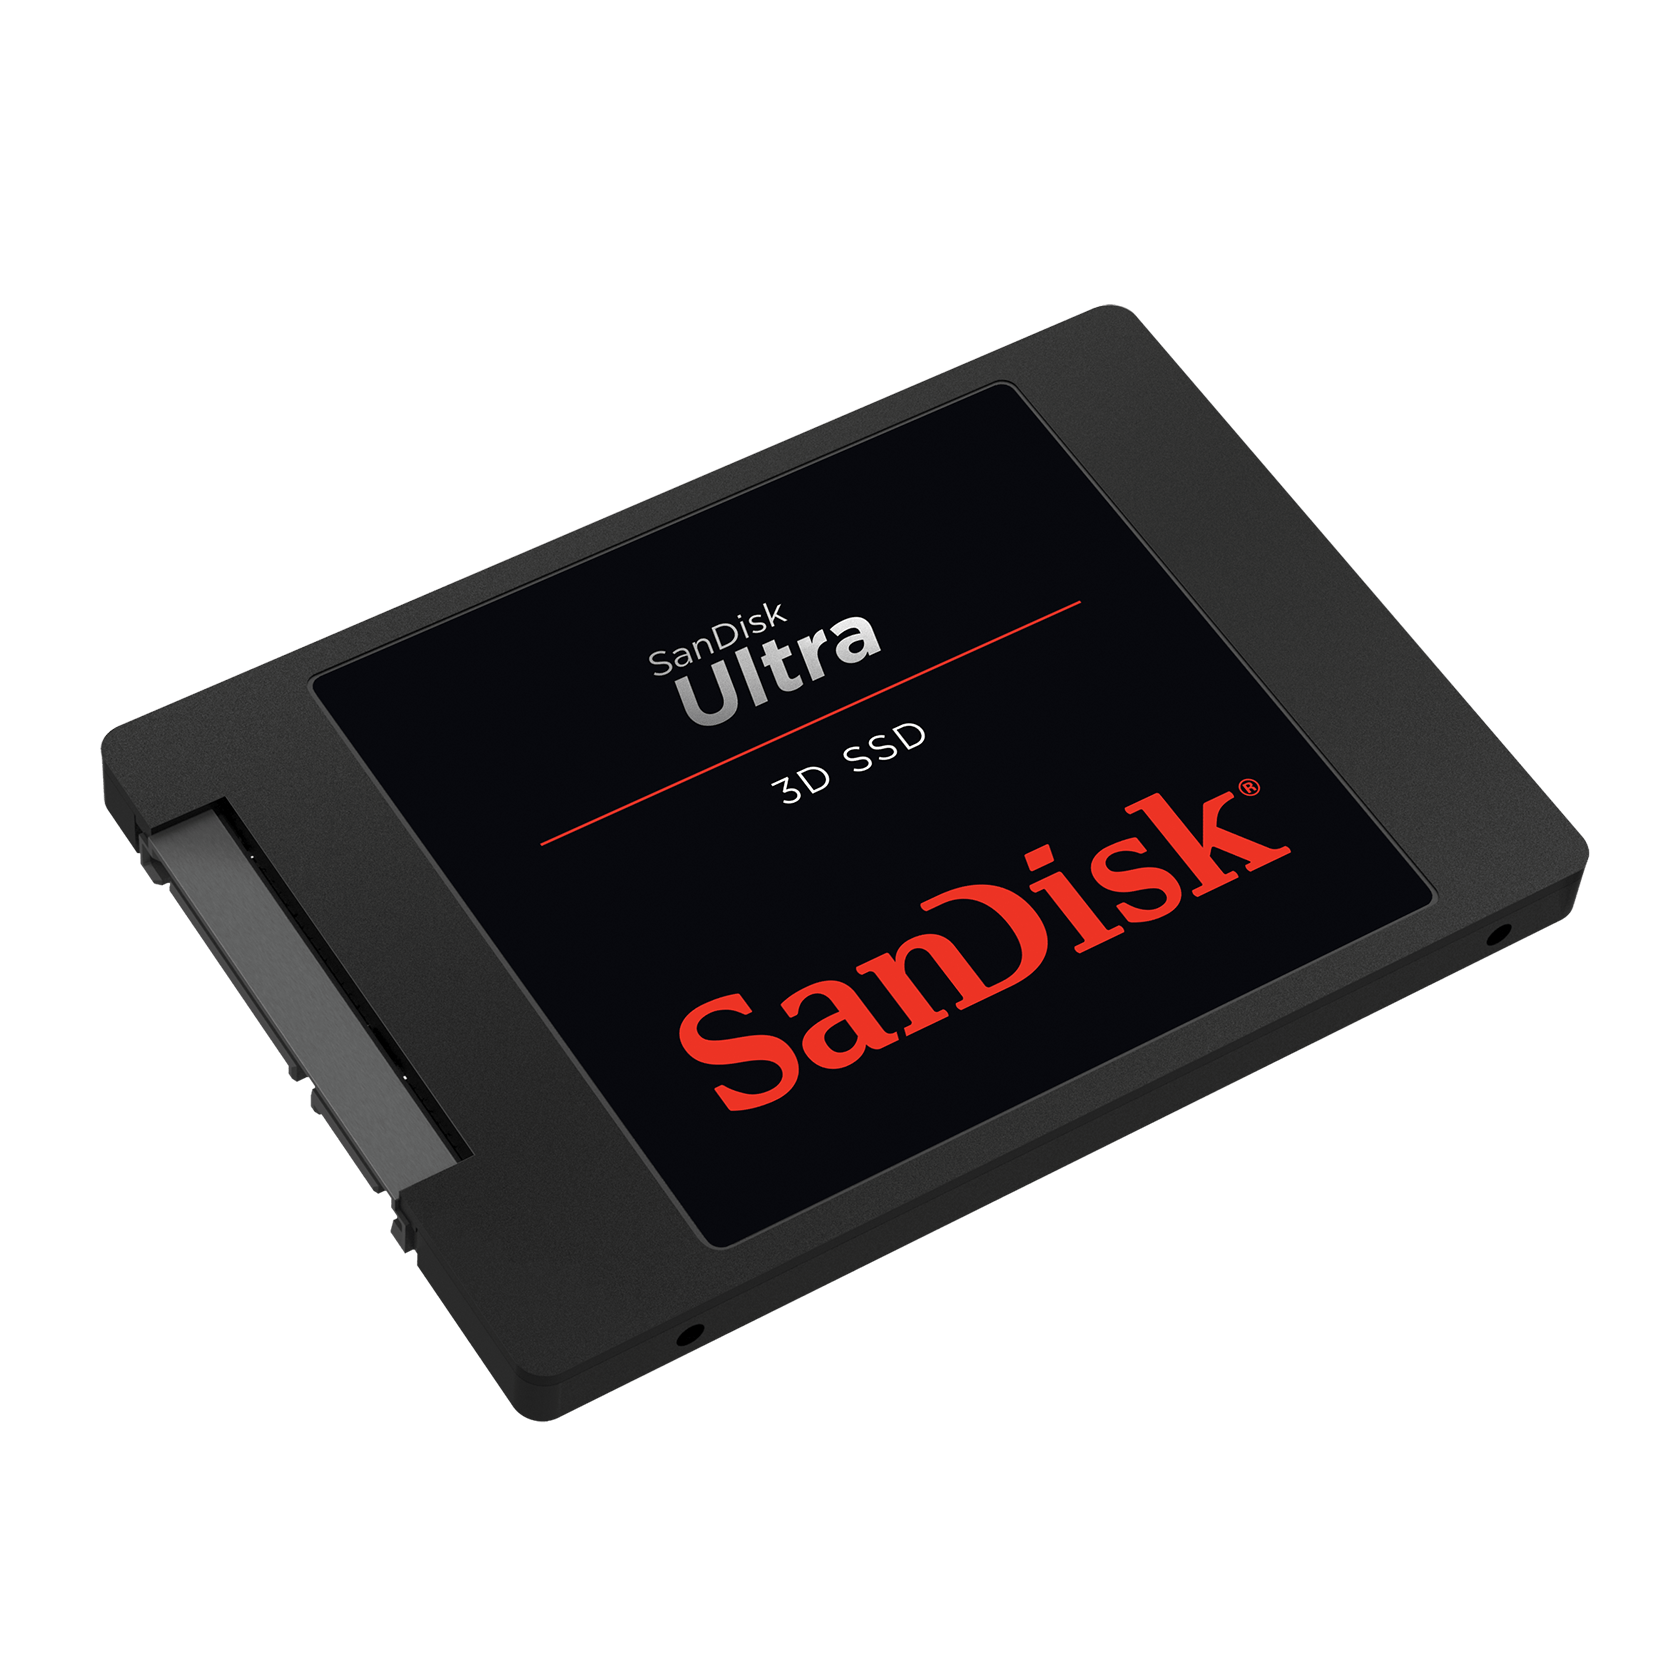 SanDisk 500GB Ultra 3D NAND SSD, Internal Solid State Drive - SDSSDH3-500G-G25 - image 3 of 5